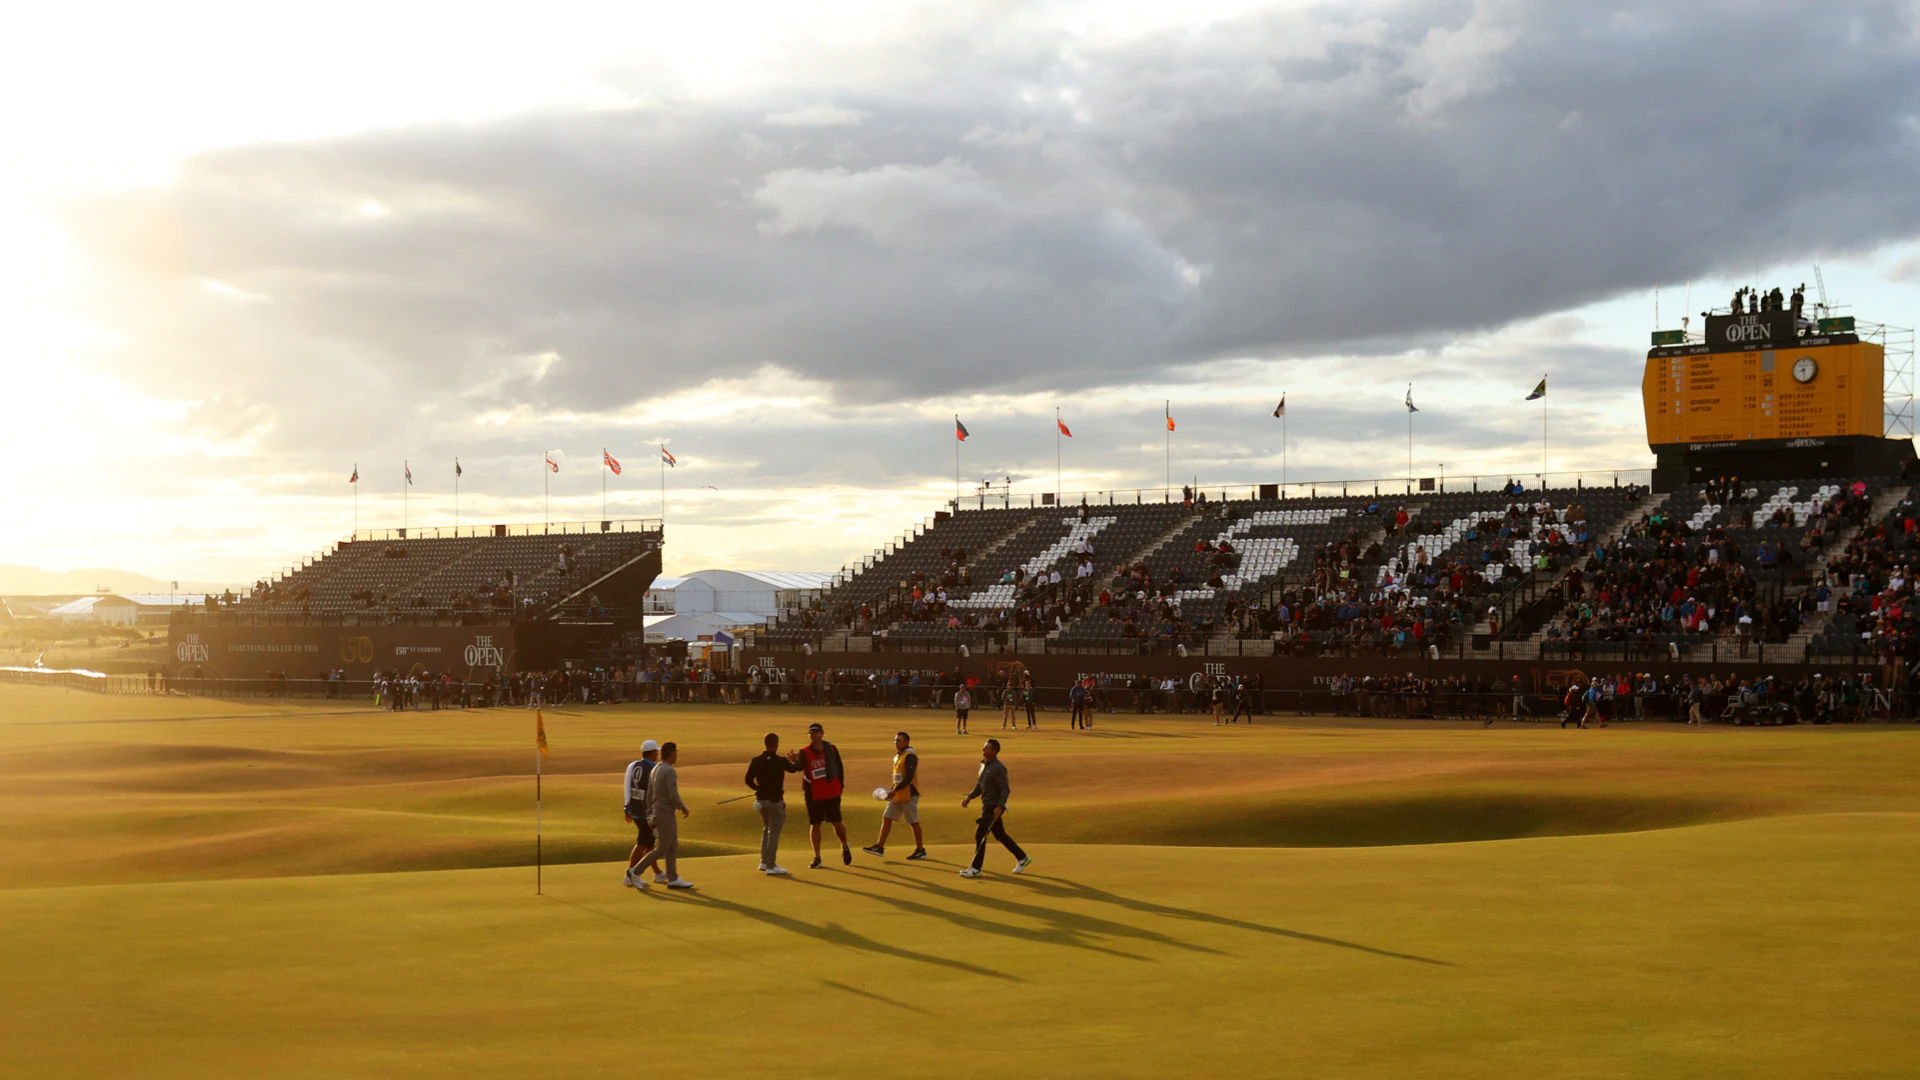 2022 British Open: Tee times and pairings for Round 3 of the 150th Open Championship